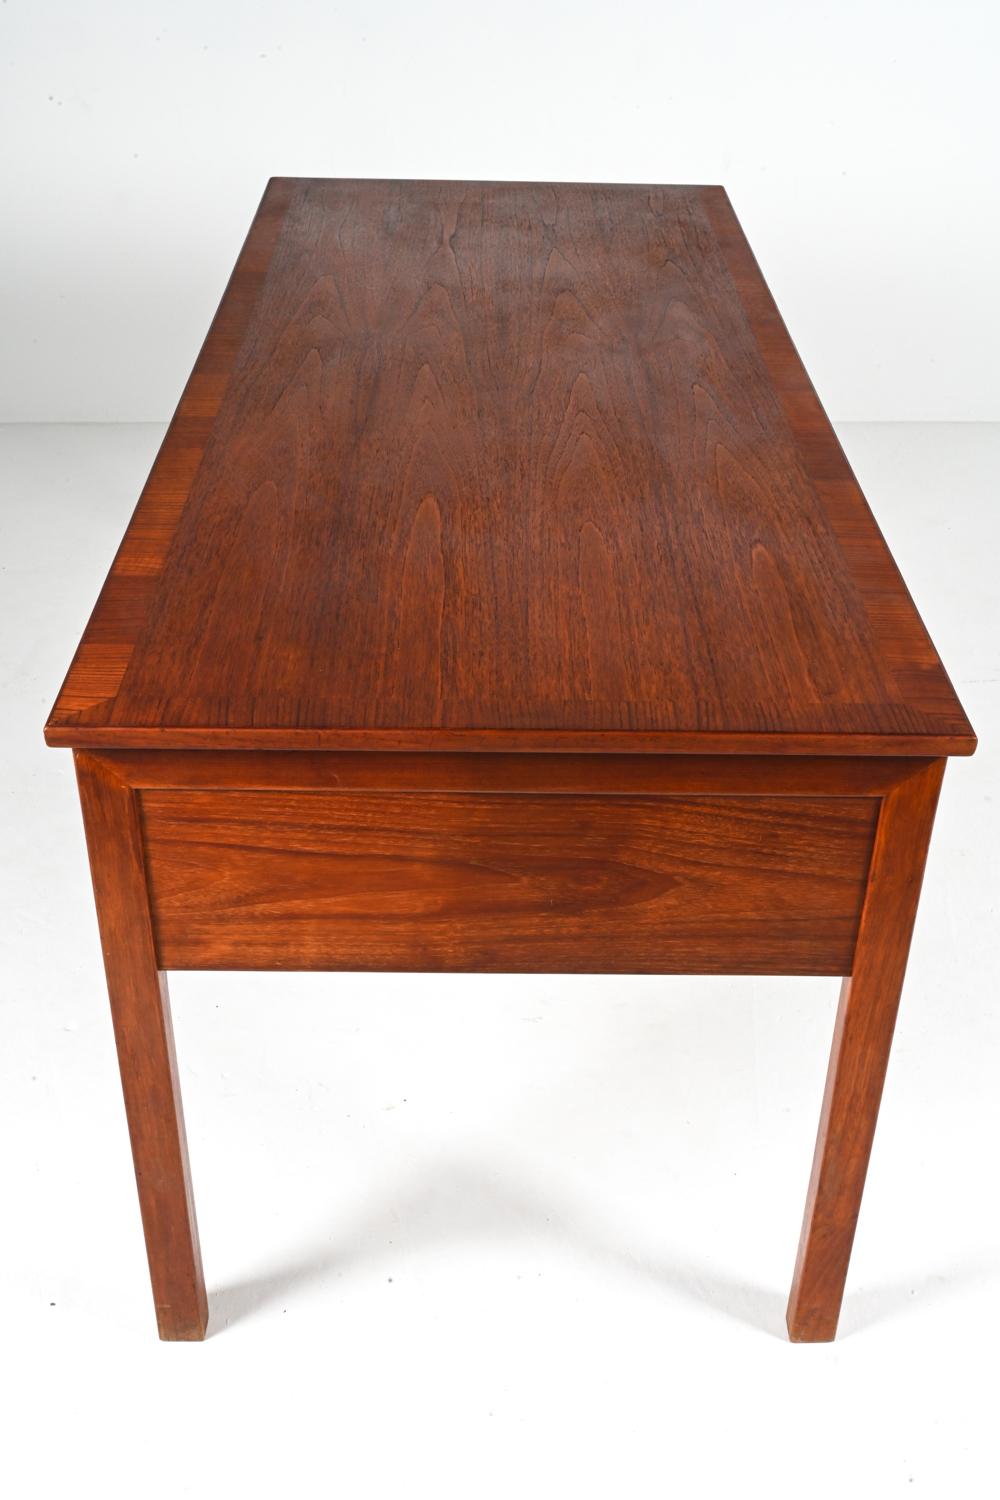 Danish Mahogany Executive Writing Desk by Ole Wanscher, c. 1950's For Sale 7